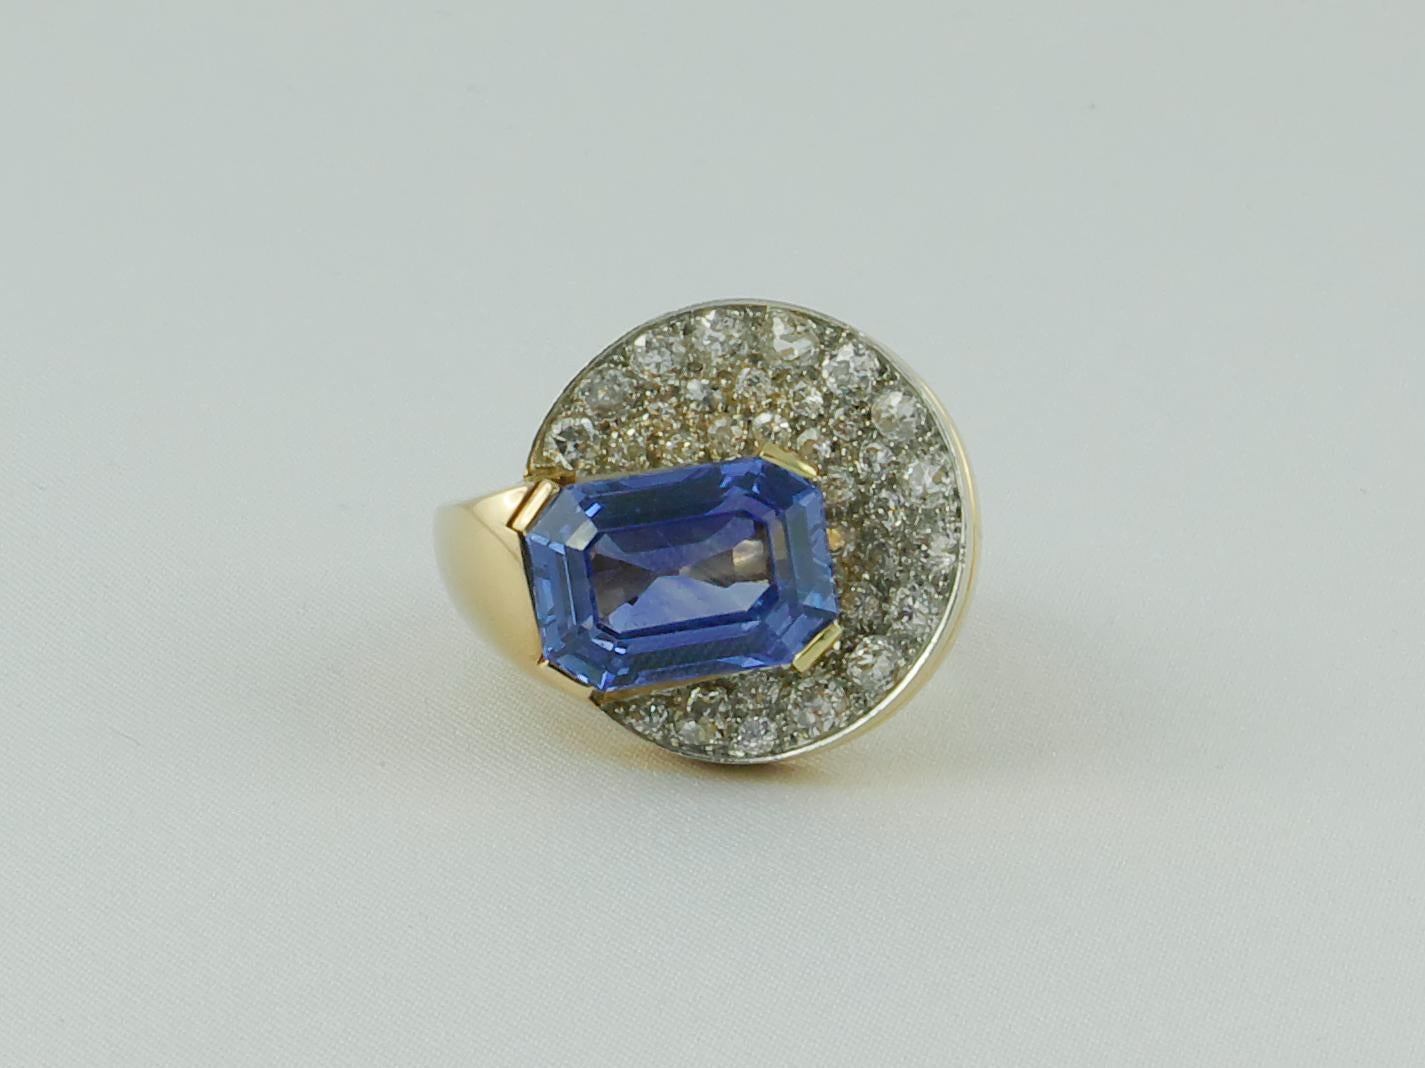 Sensational 8.77 carat Ceylon Sapphire non heat,  mounted on a Diamond, Yellow Gold and Platinum striking 1940s ring.
This retro extremely elegant and sophisticated Yellow Gold ring has an enormous presence, it  has a centering on an emerald-cut 